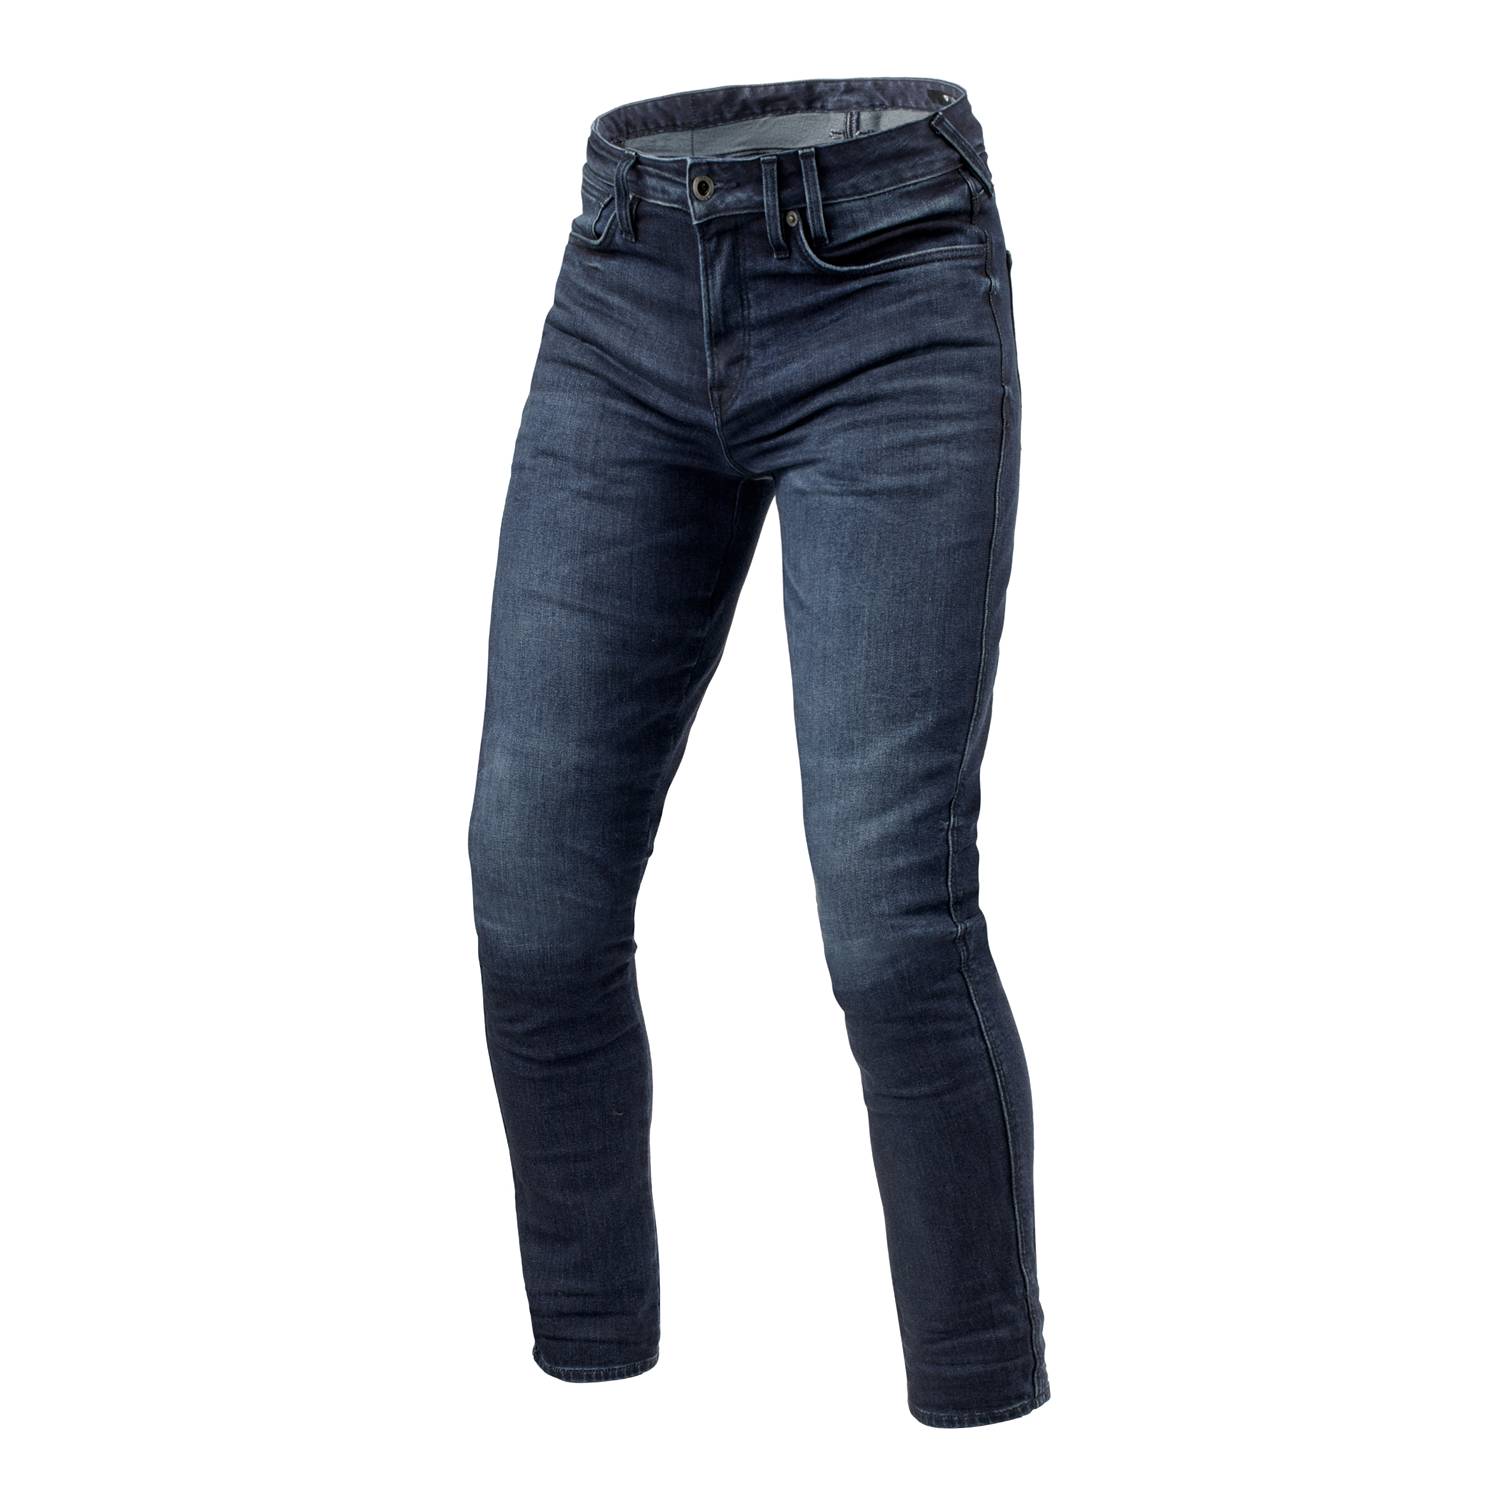 Image of EU REV'IT! Jeans Carlin SK Dark Blue Used L36 Motorcycle Jeans Taille L36/W30